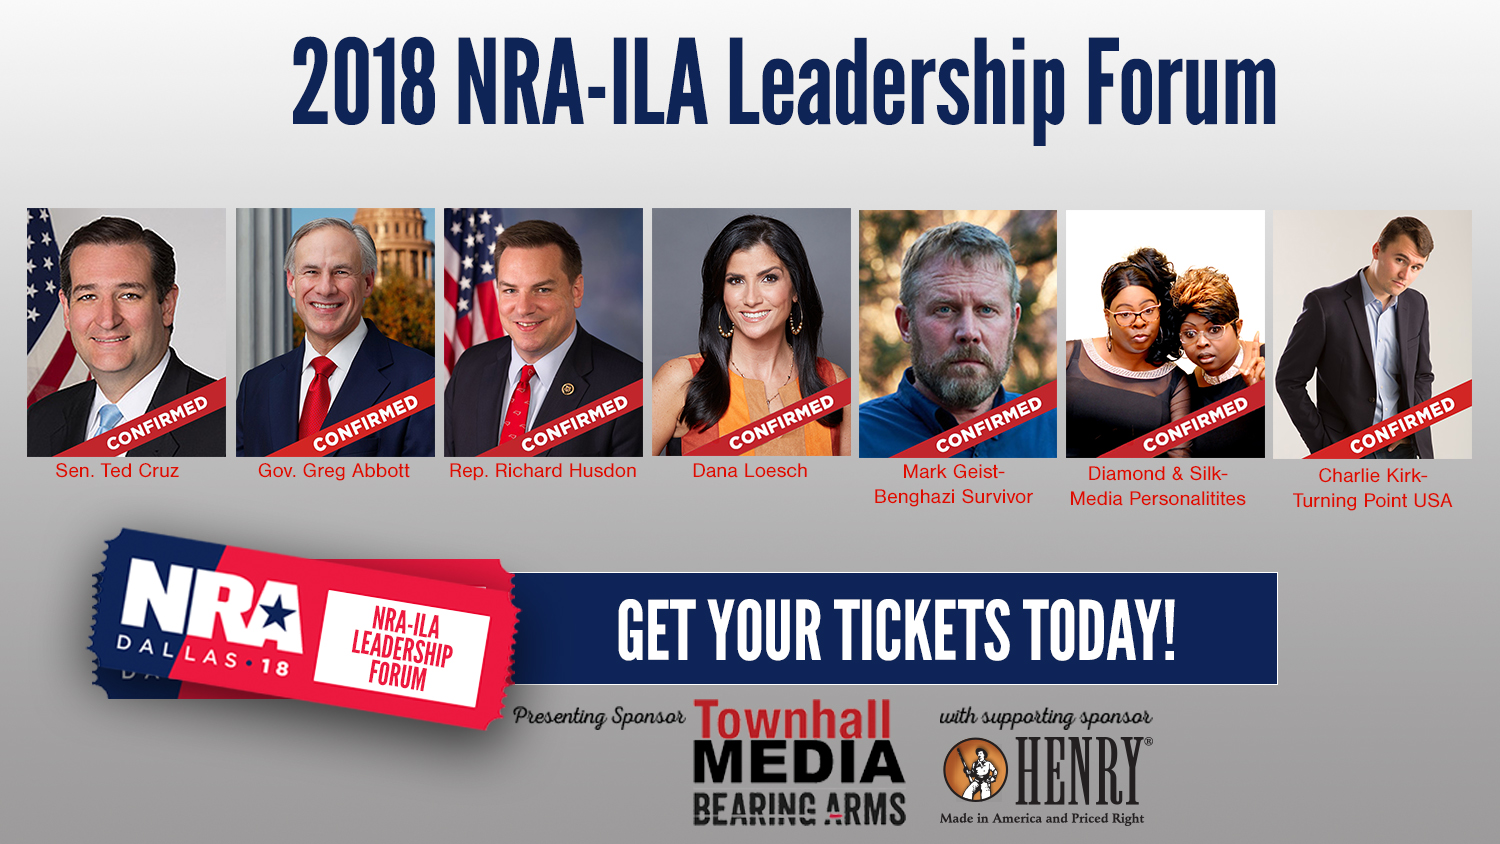 Get Your NRA-ILA Leadership Forum Tickets